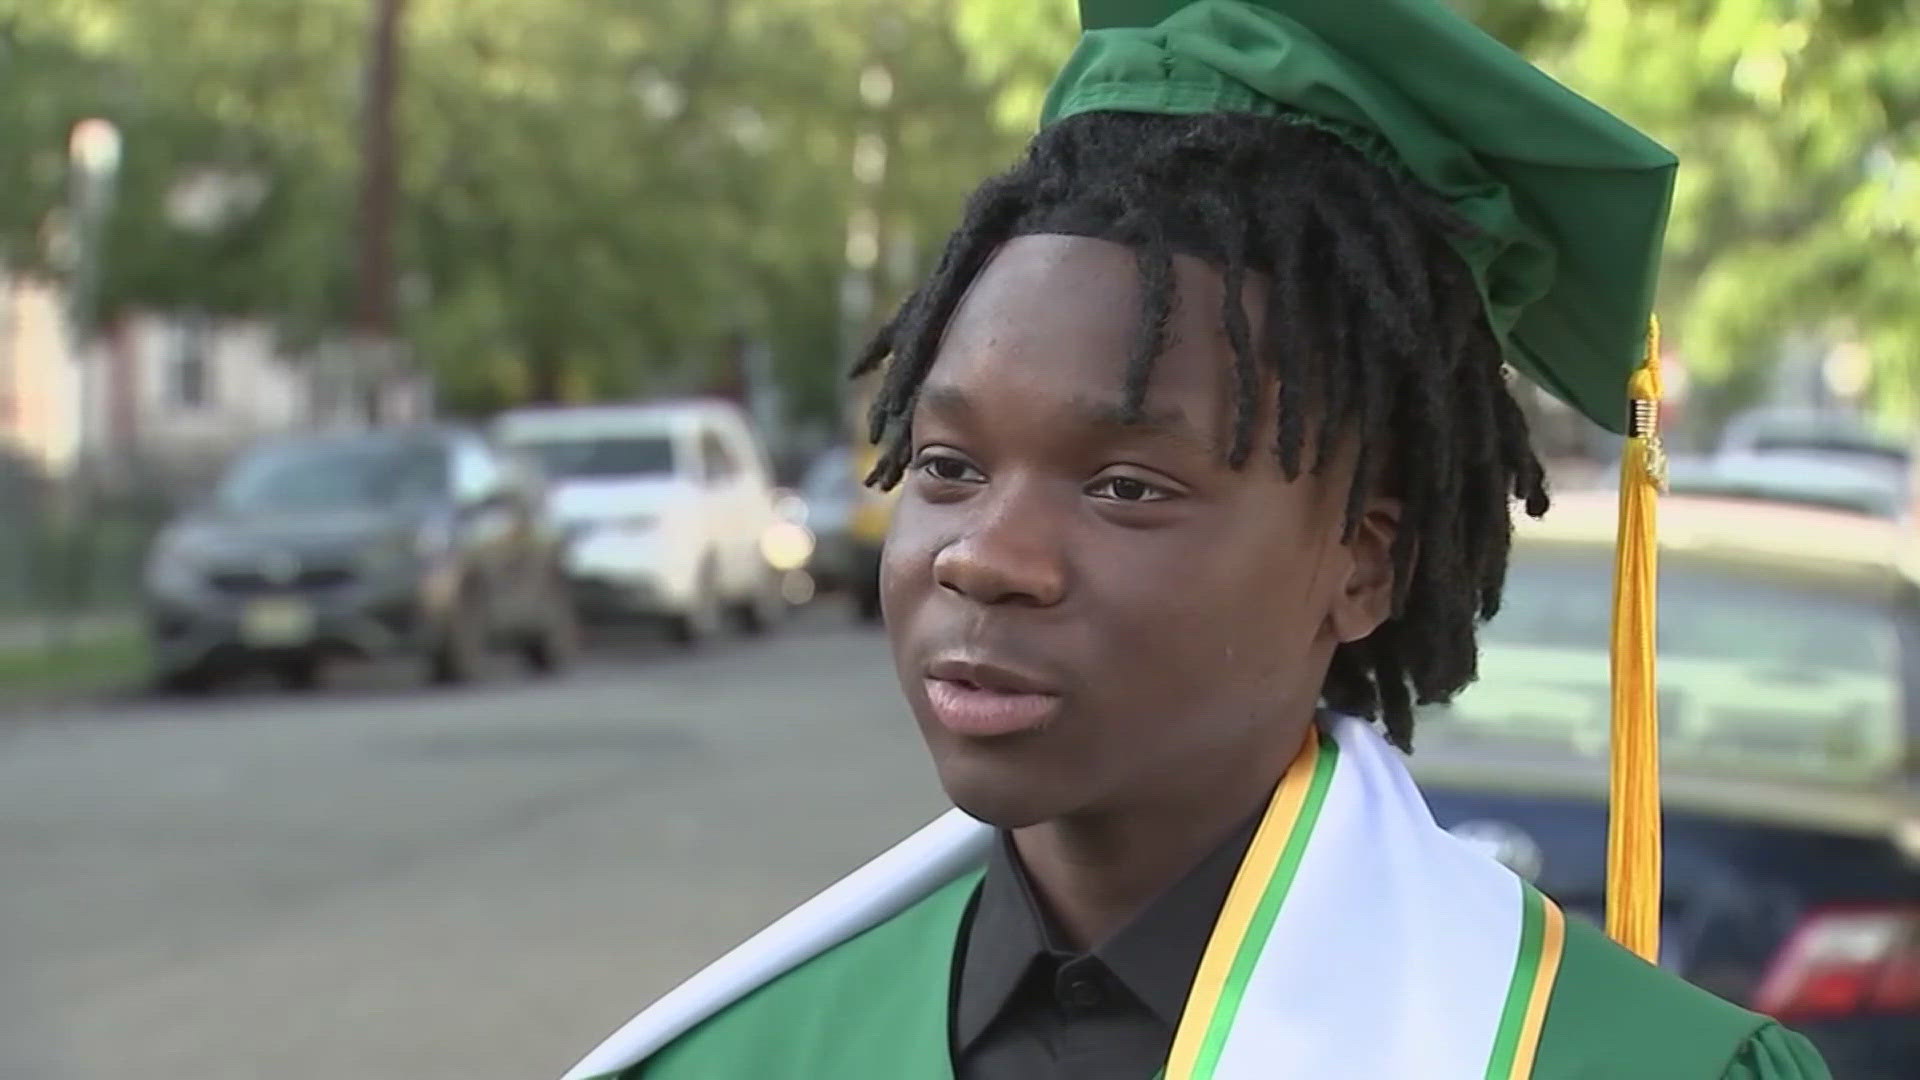 A 17-year-old is getting us uplifted due to his hard work in school that has truly paid off.